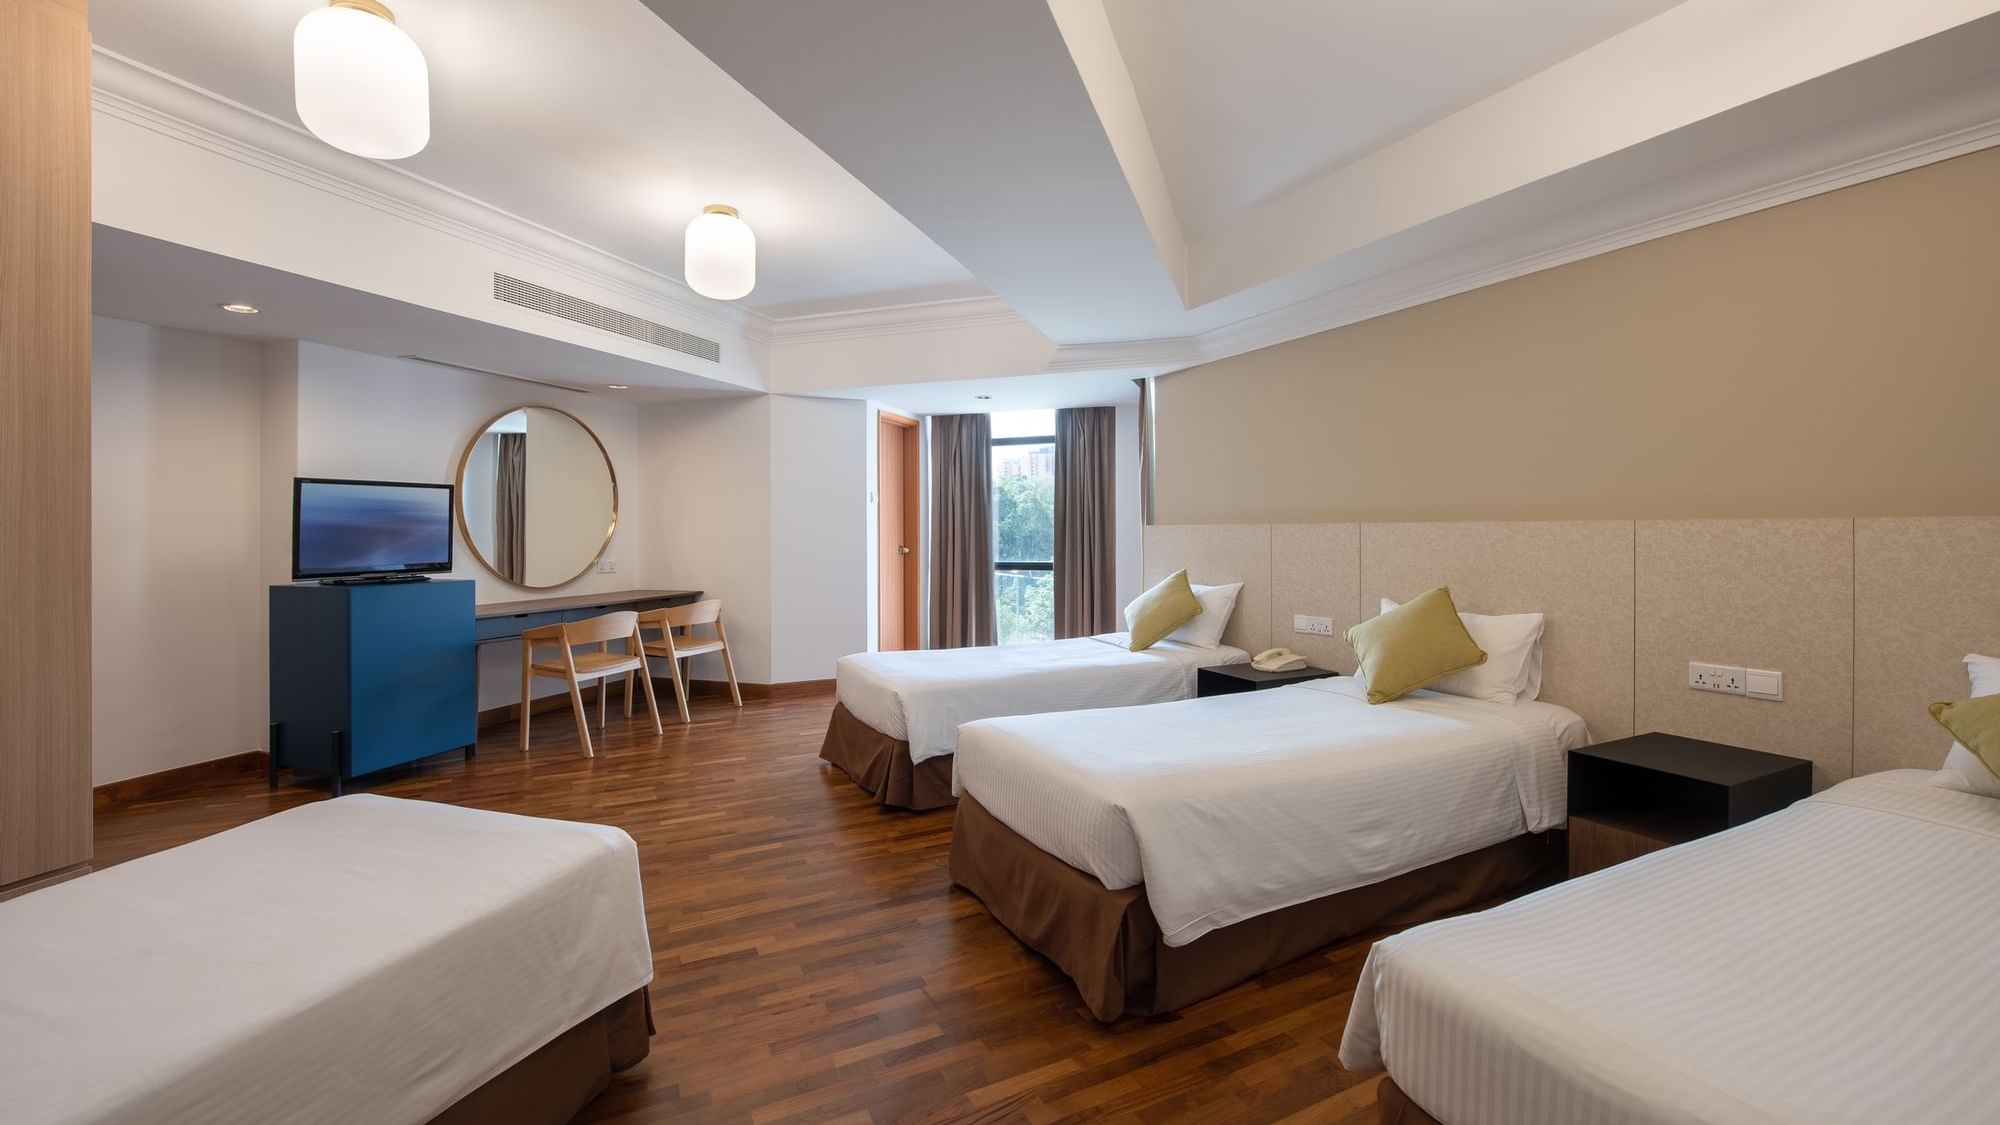 Ywca Fort Canning Large Hotel Rooms Singapore